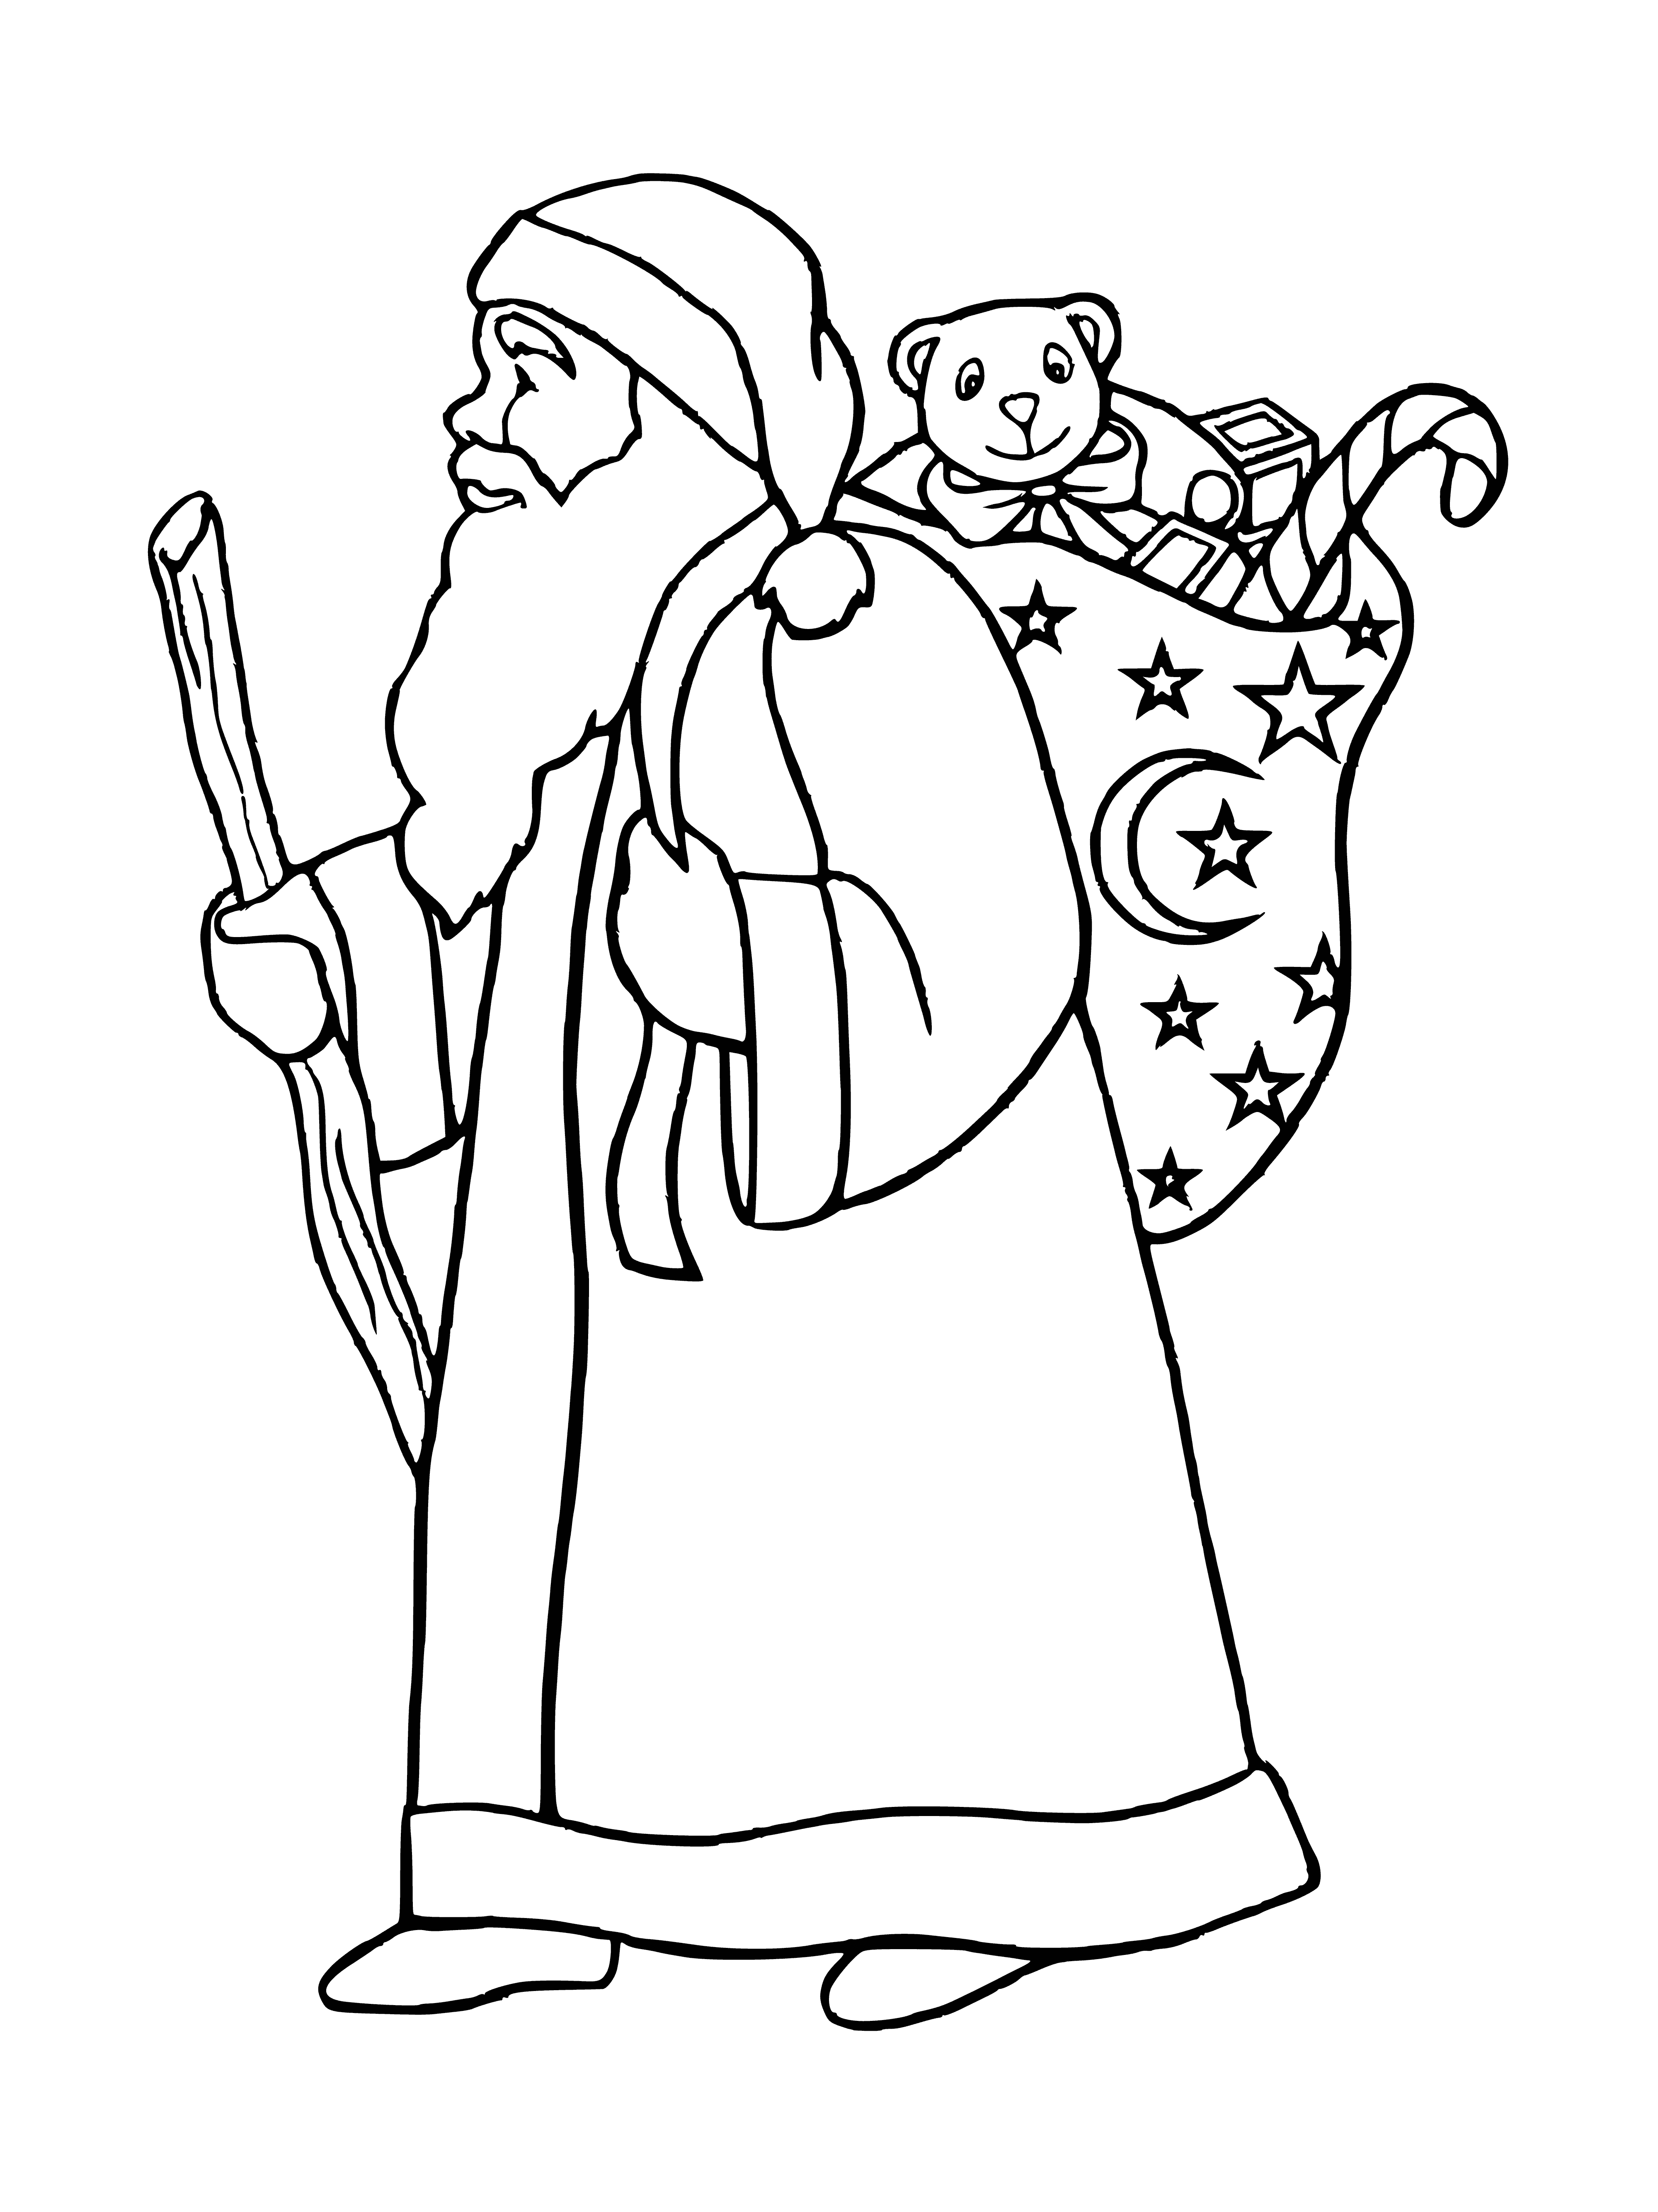 coloring page: Santa is a jolly old man with a white beard, red suit, black boots & a sack of toys. He has a twinkle in his eye & a candy cane in hand.